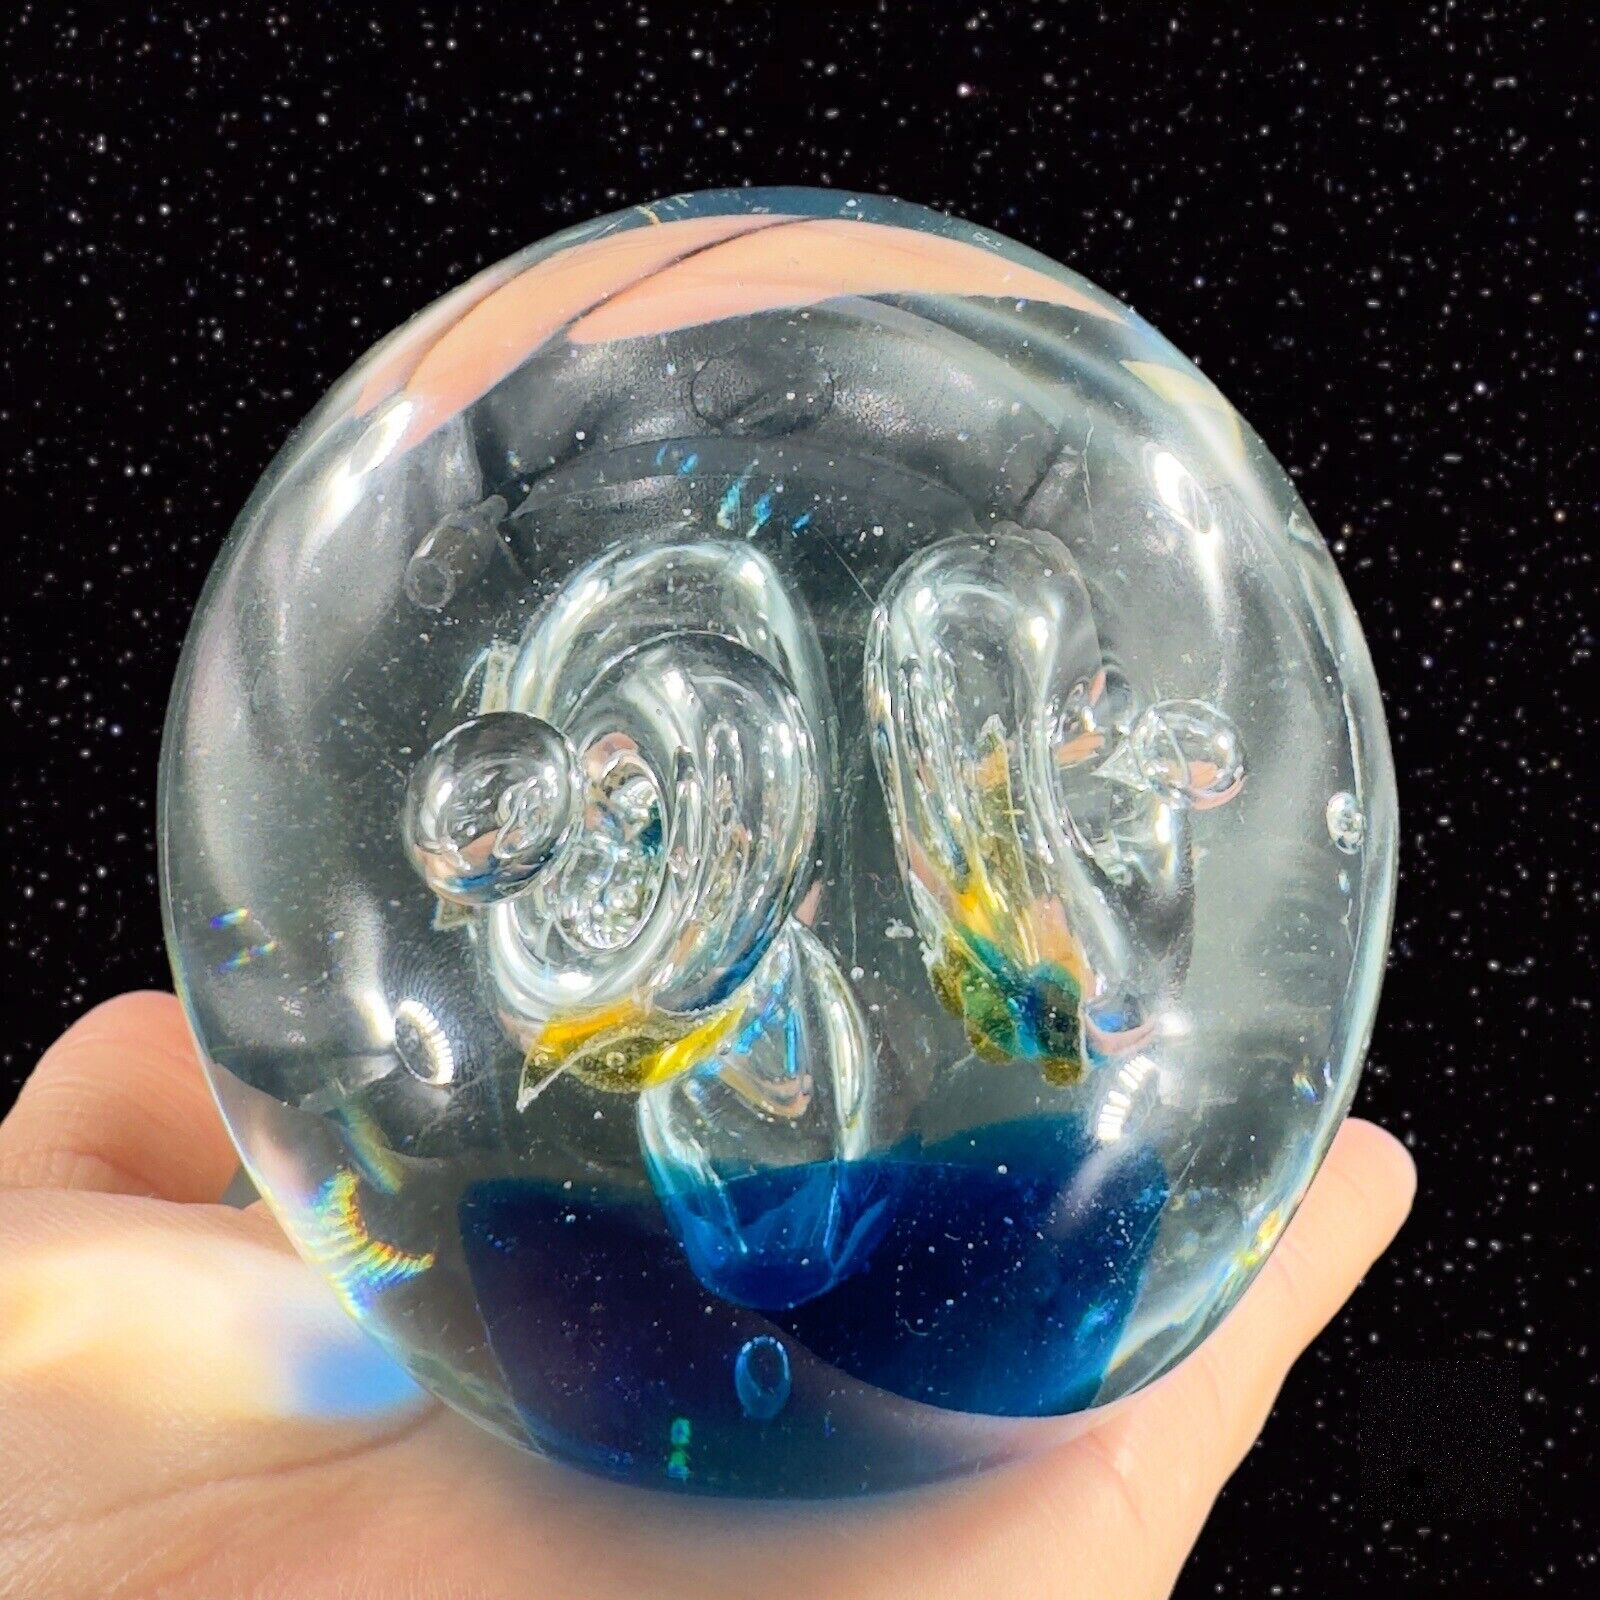 Venetian Art Glass Paperweight Figurine Multicolor Large Bubbles In The Middle